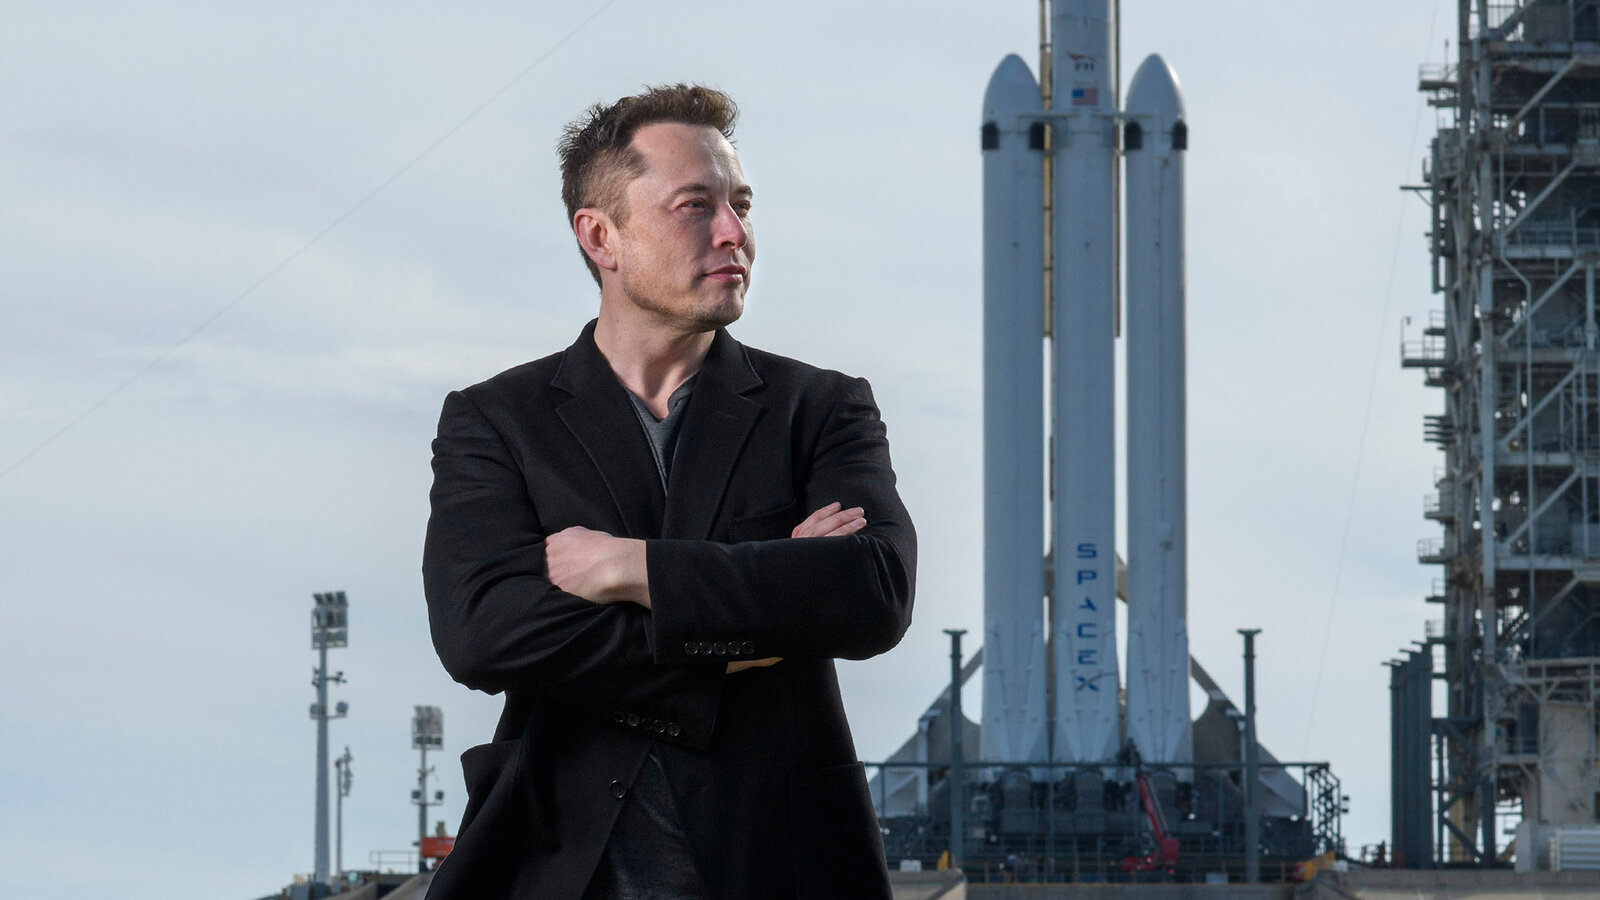 Yet Another SpaceX Rocket Launch Planned to Deliver Military Cargo and Aid